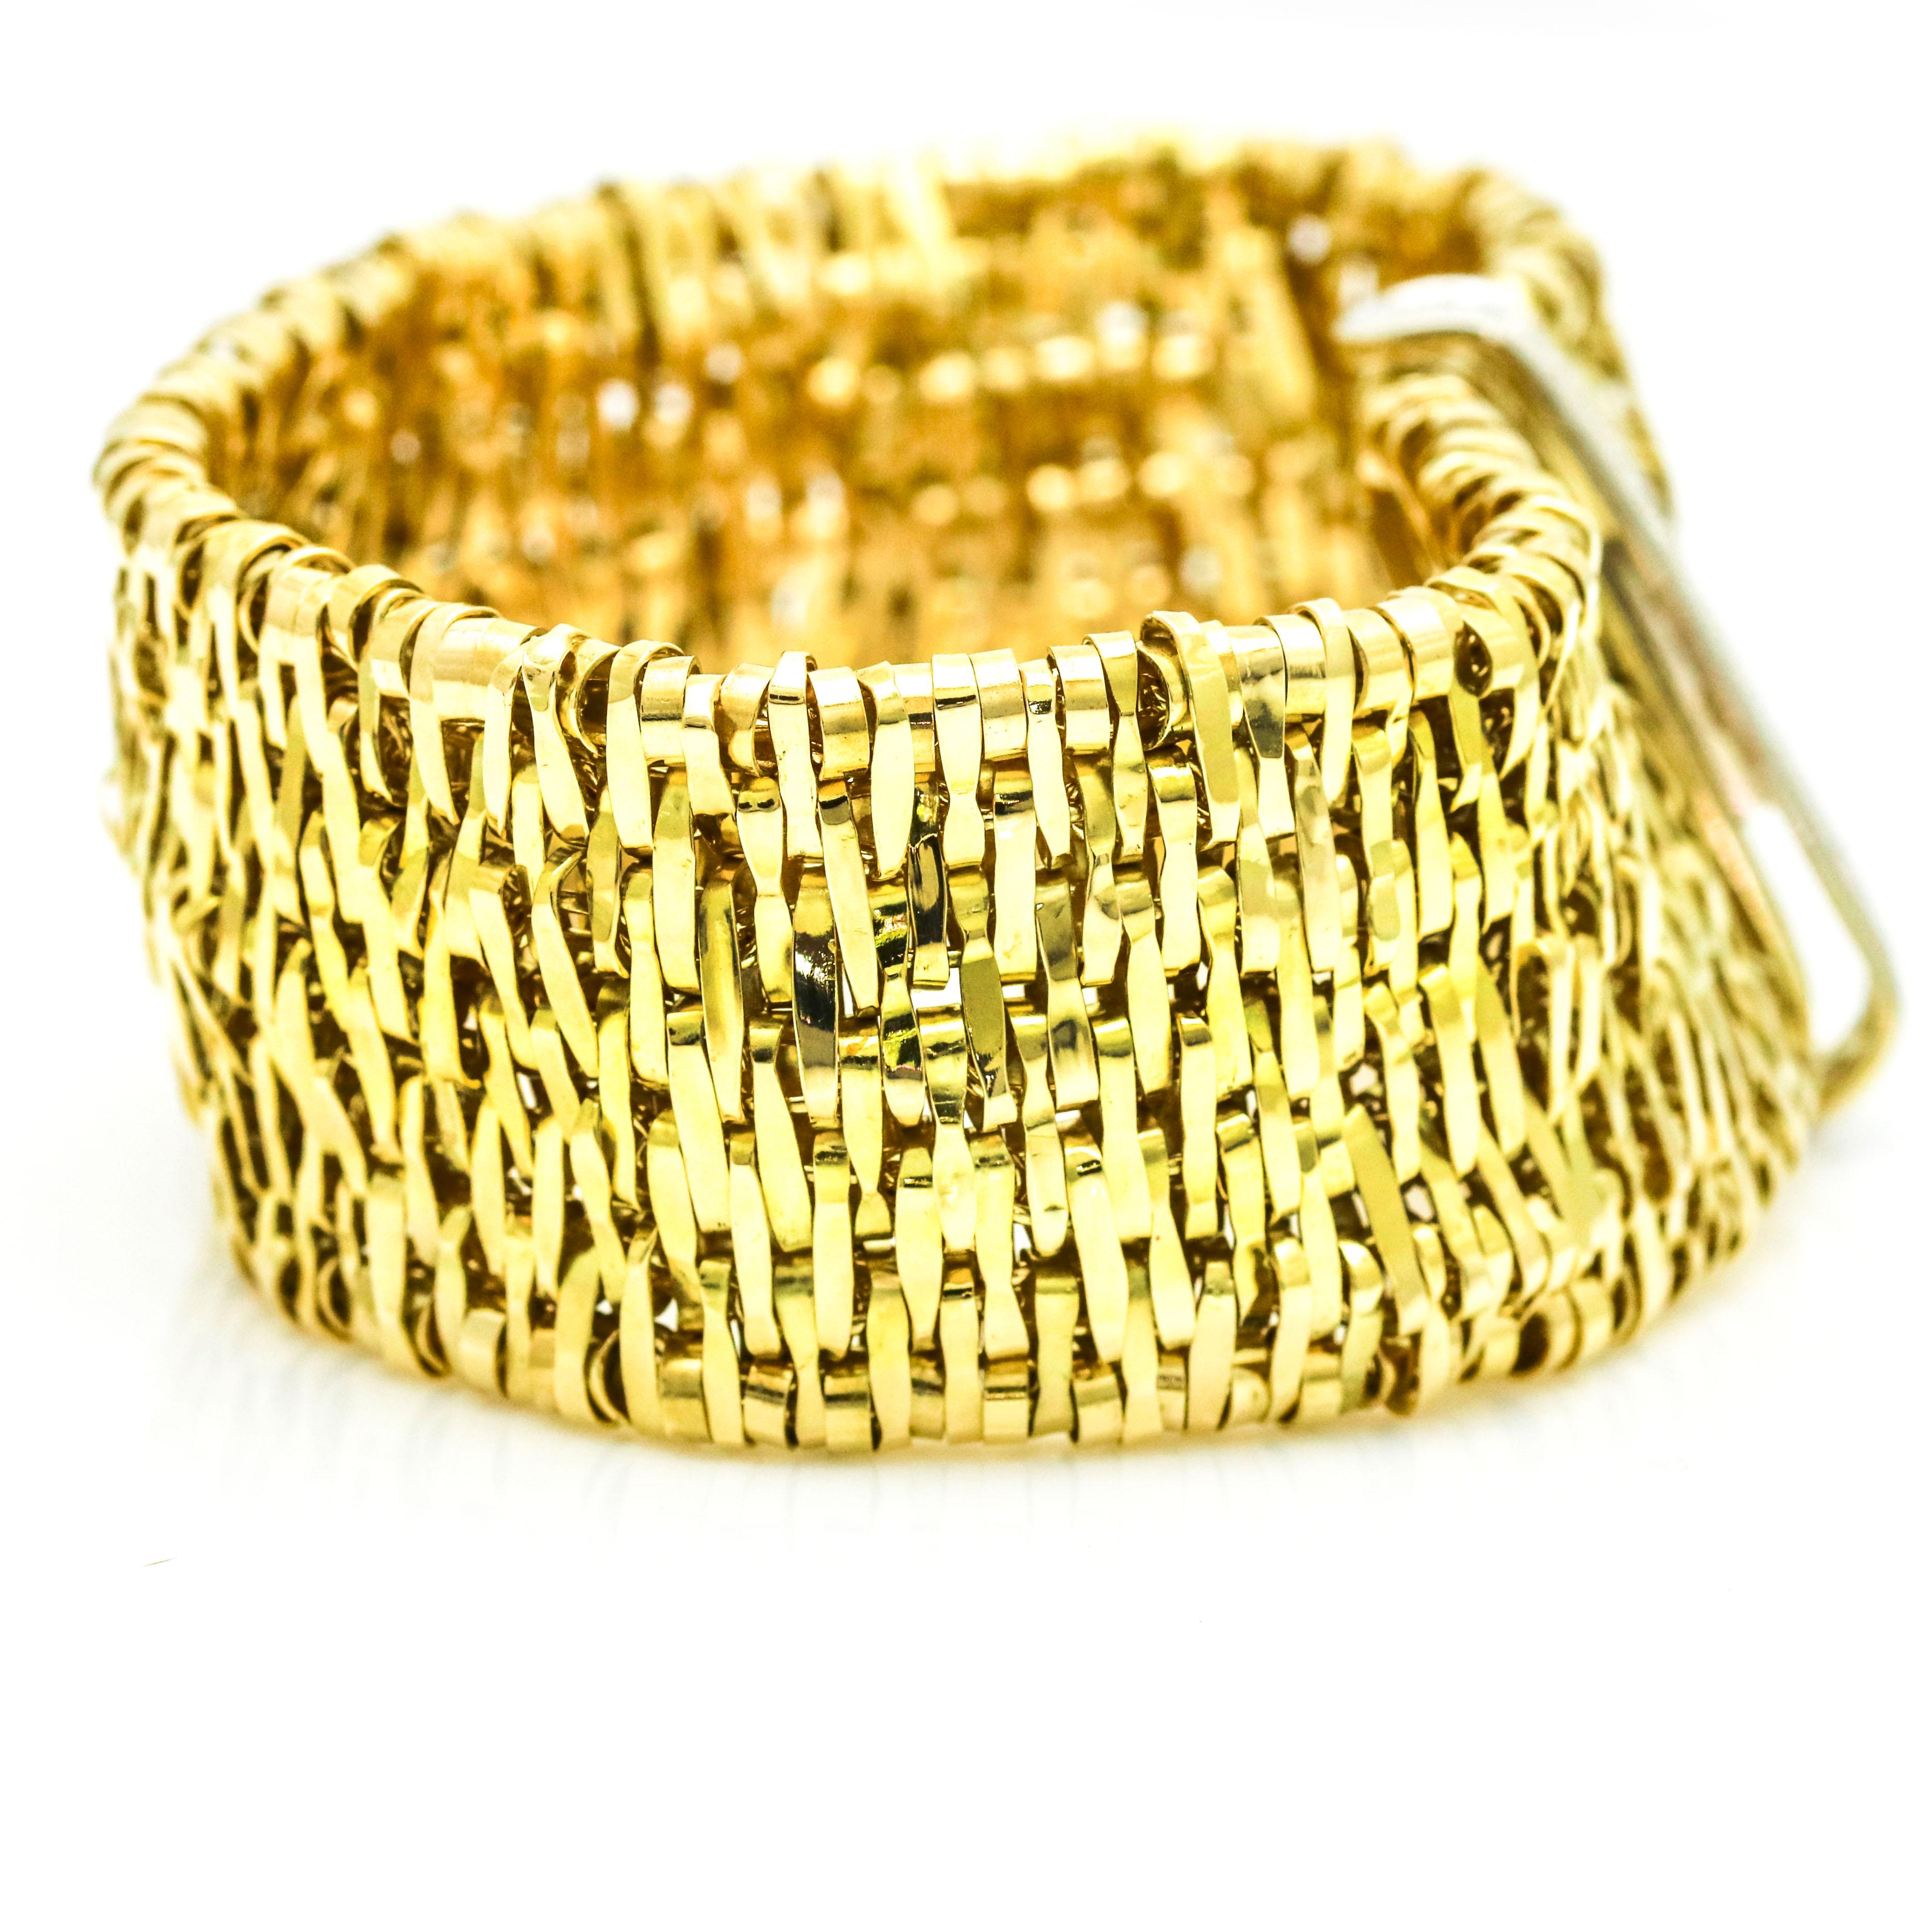 Orlando Orlandini Fiandra wide woven link bracelet crafted in 18 karat yellow gold with diamonds on clasp. The small woven links make this bracelet flexible. The metal is high polish and feels soft on the skin. Push clasp with a safety. 